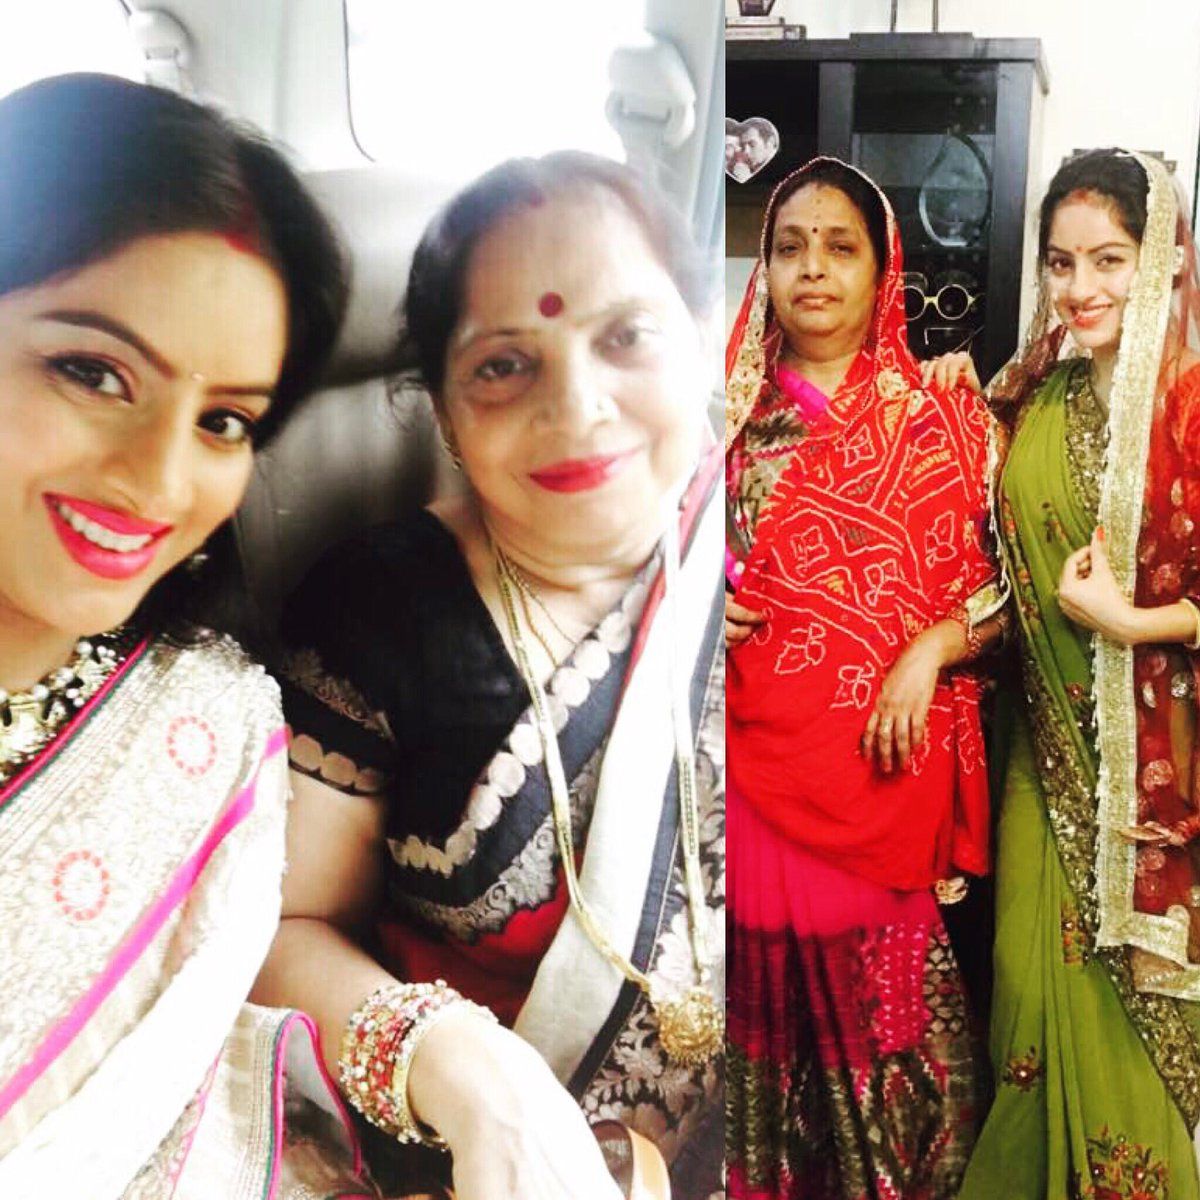 TV Actress Deepika Singh's Mother Admitted To A Hospital After Her Appeal To Delhi CM